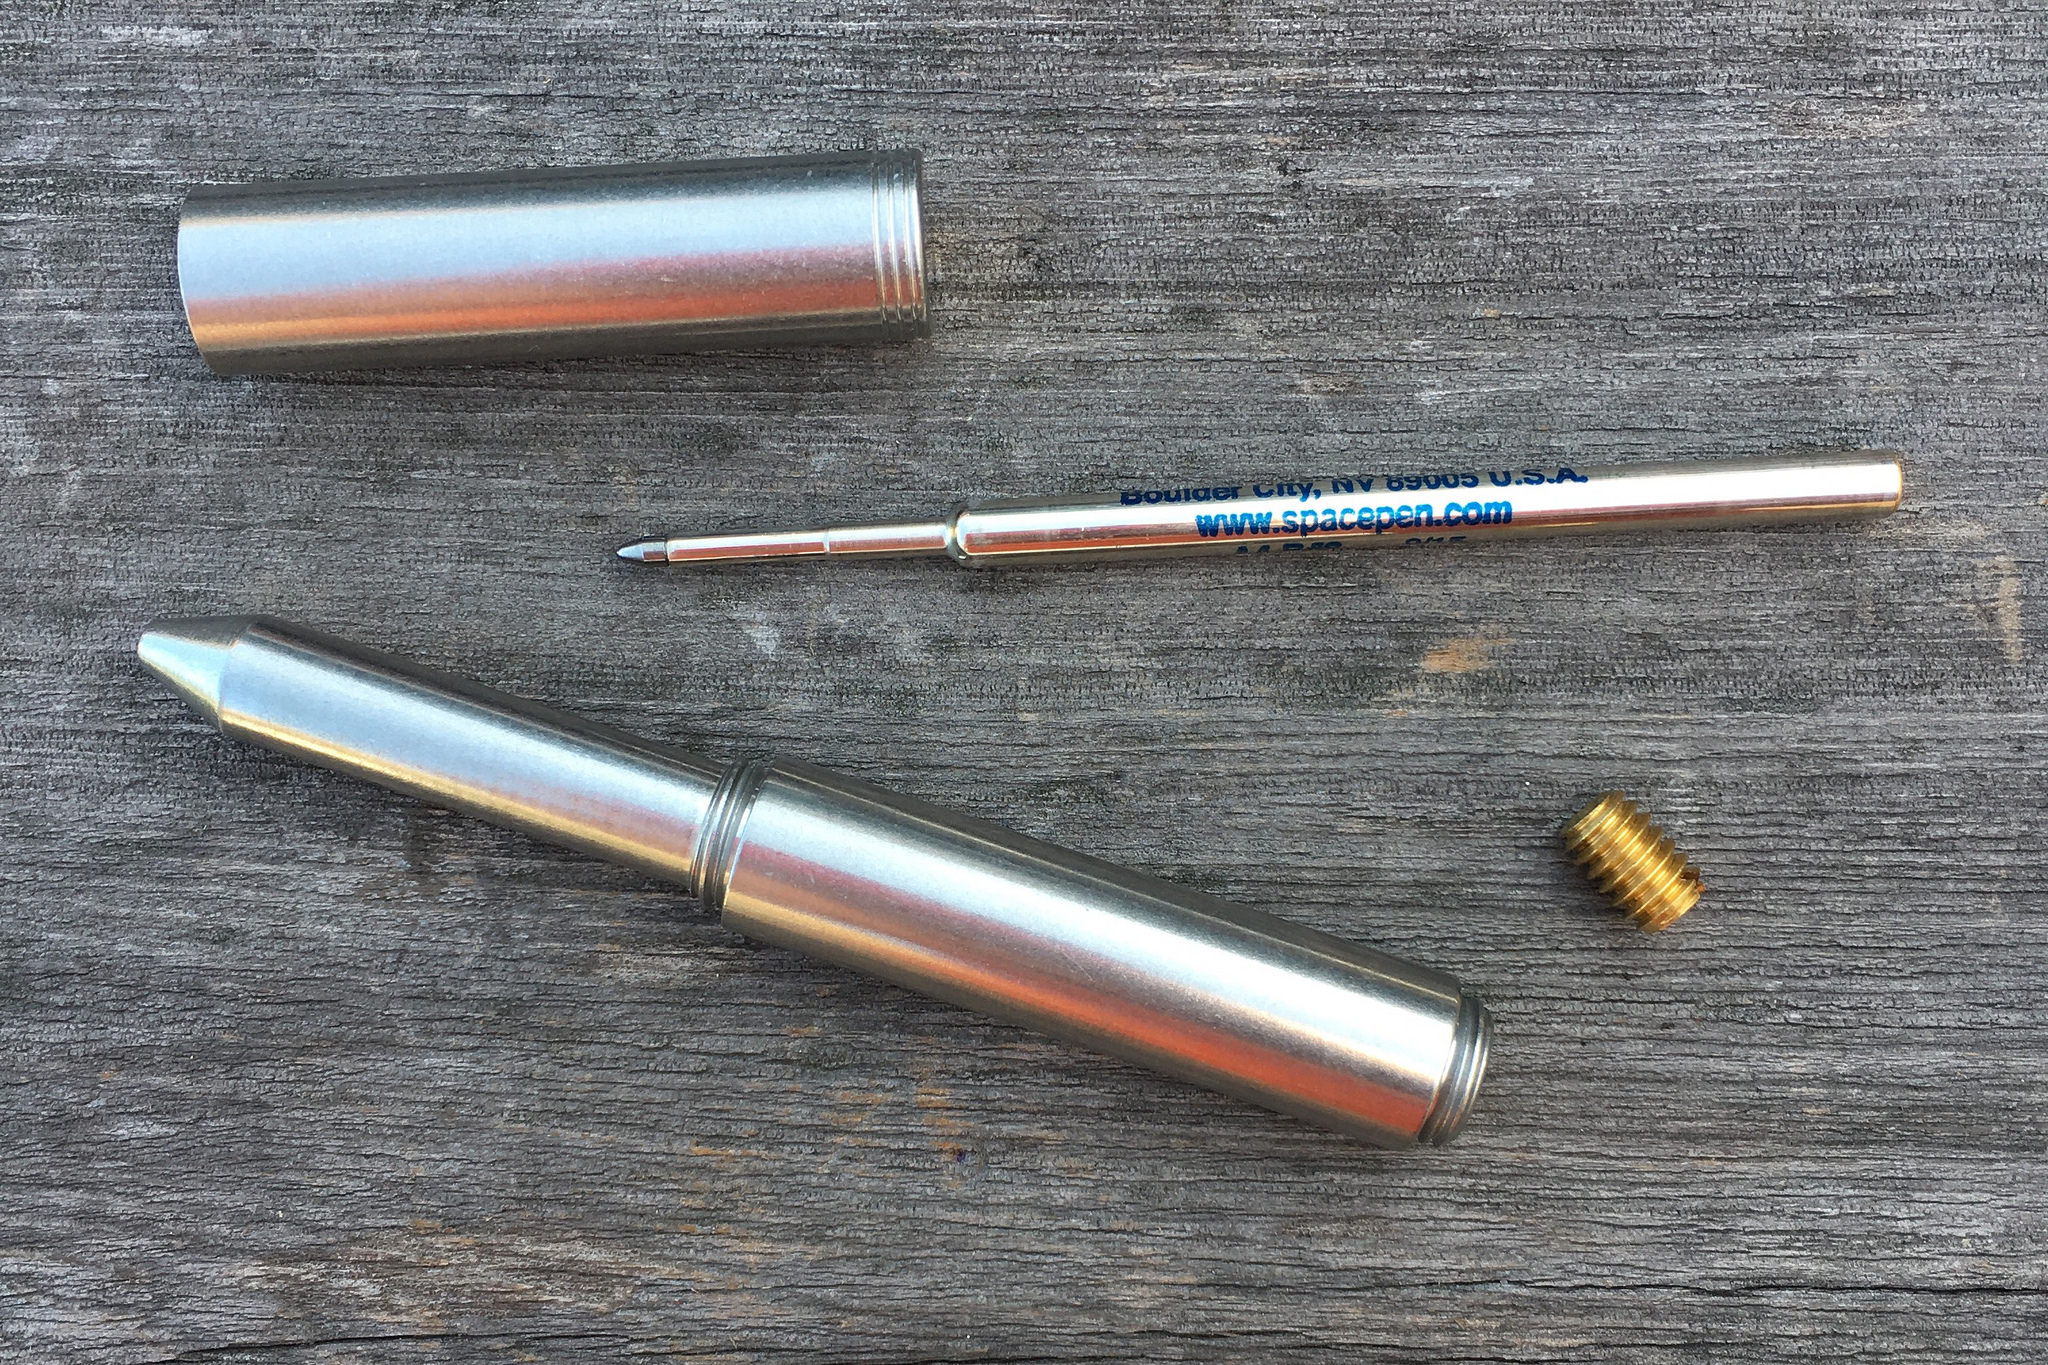 Schon Dsgn #01S Tumbled Stainless Steel Pocket Pen Review — The